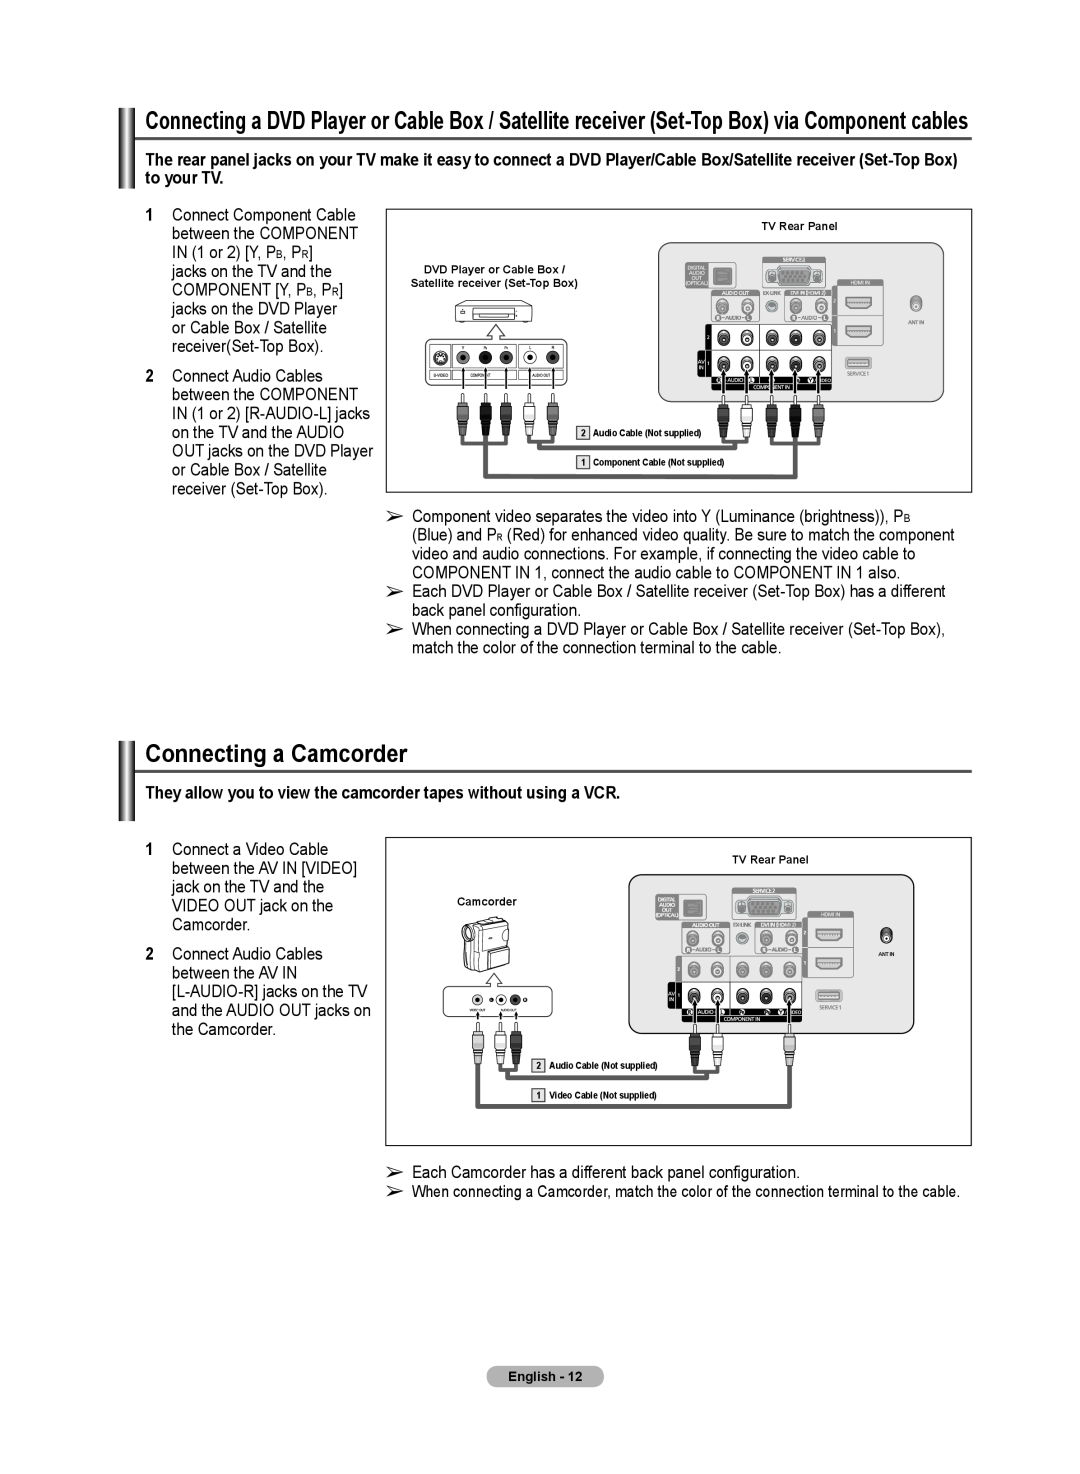 Samsung 510 user manual Connecting a Camcorder, They allow you to view the camcorder tapes without using a VCR 